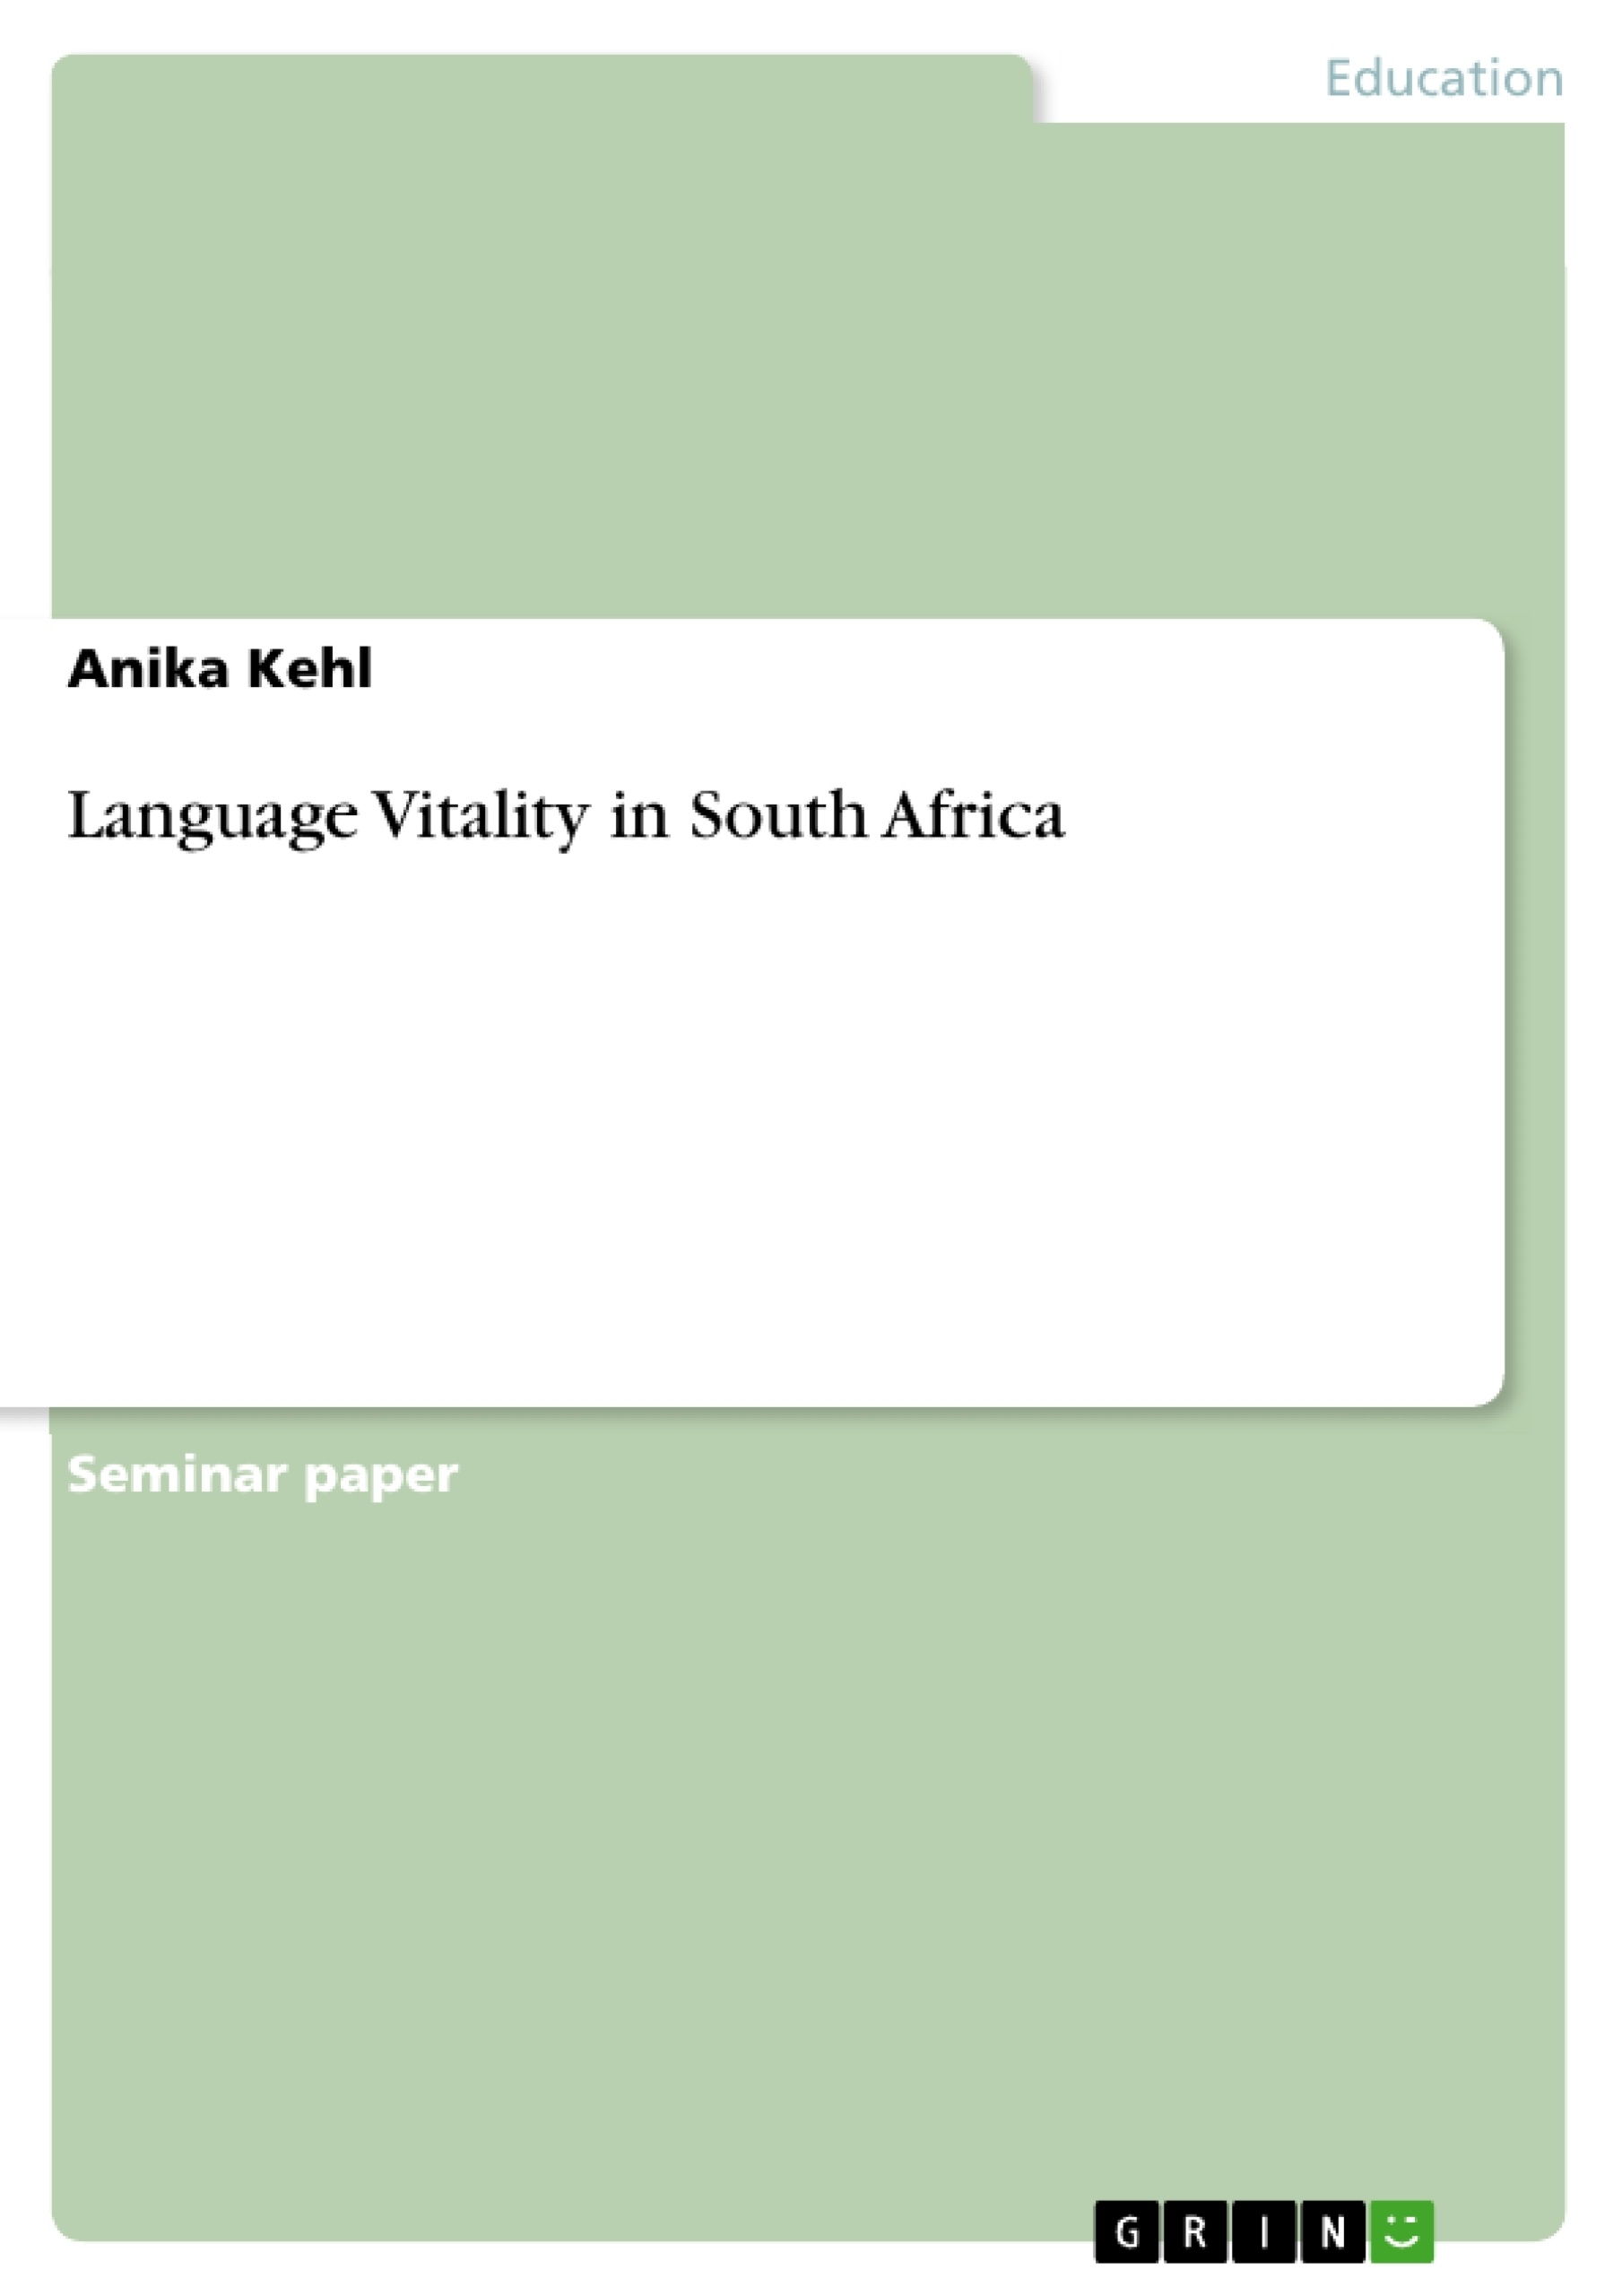 Título: Language Vitality in South Africa